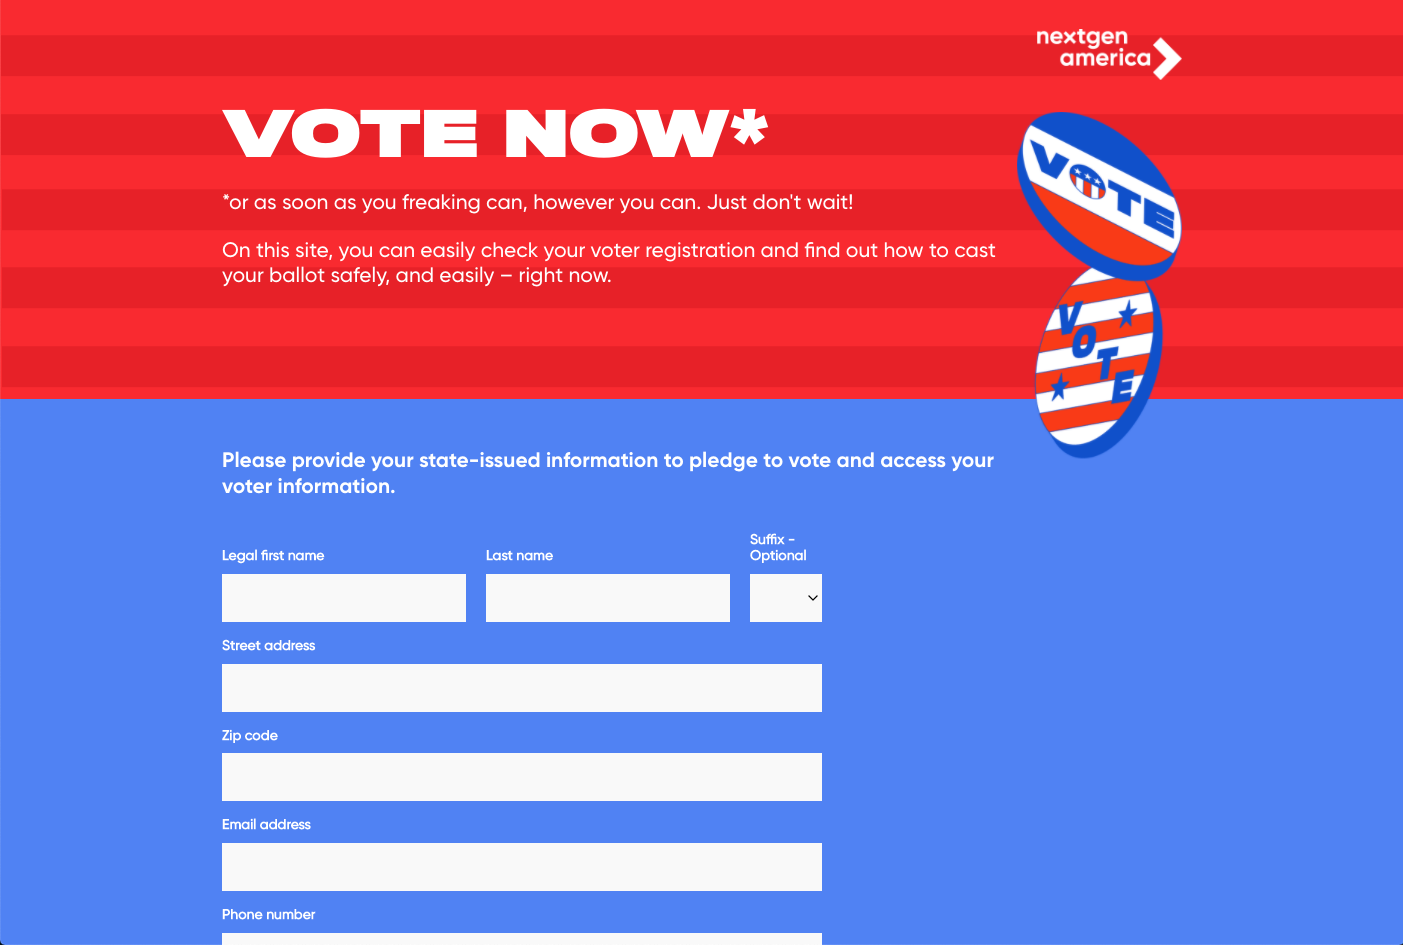 Screenshot of voterightnow.com, a site that allows people to check their voter registration status and receive information about their state-specific voting options